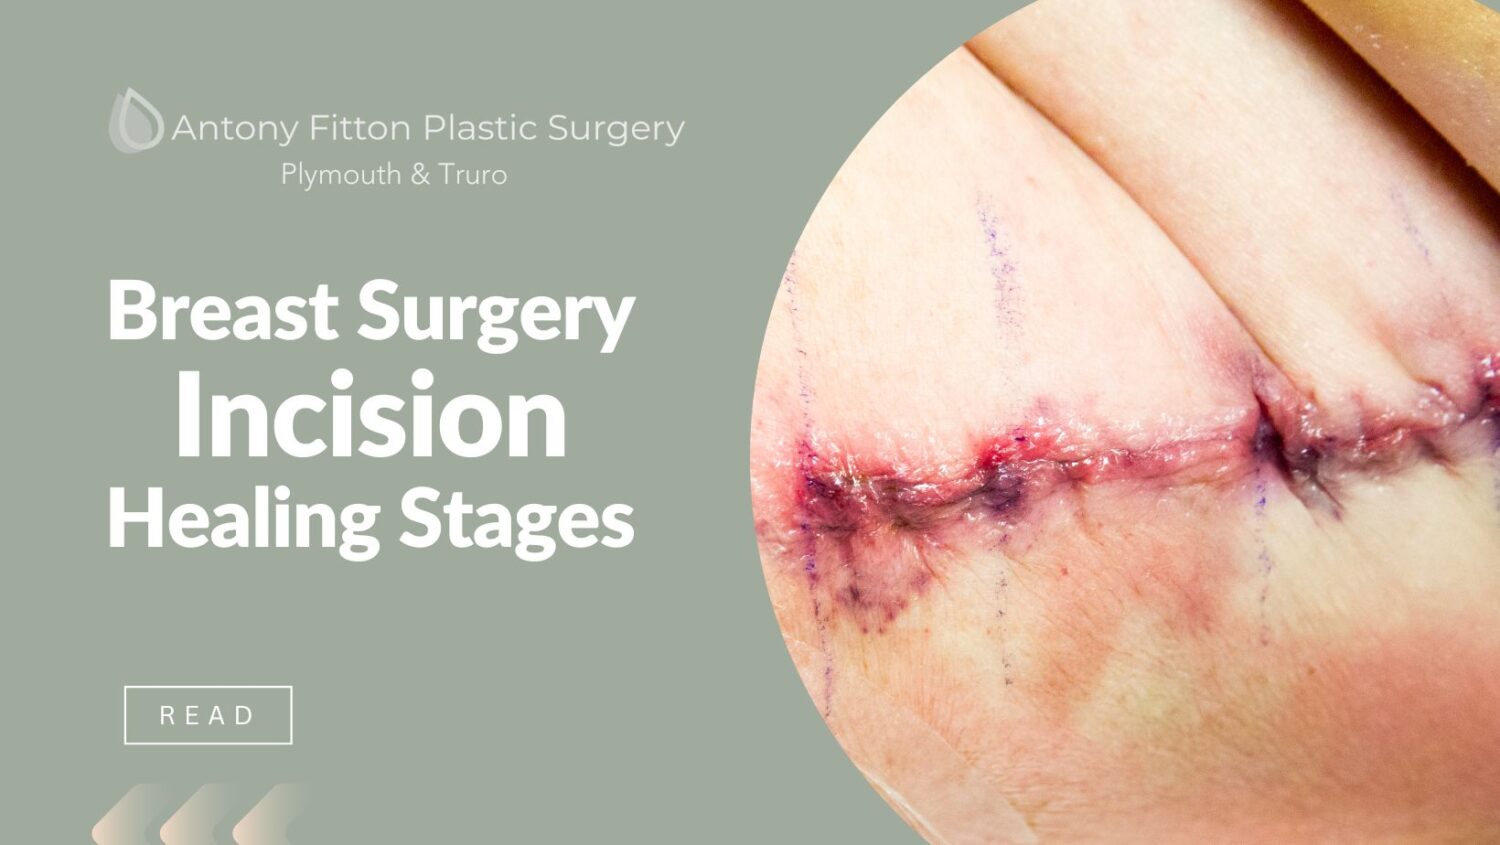 Breast Surgery Incision Healing Stages | Antony Fitton Plastic Surgery